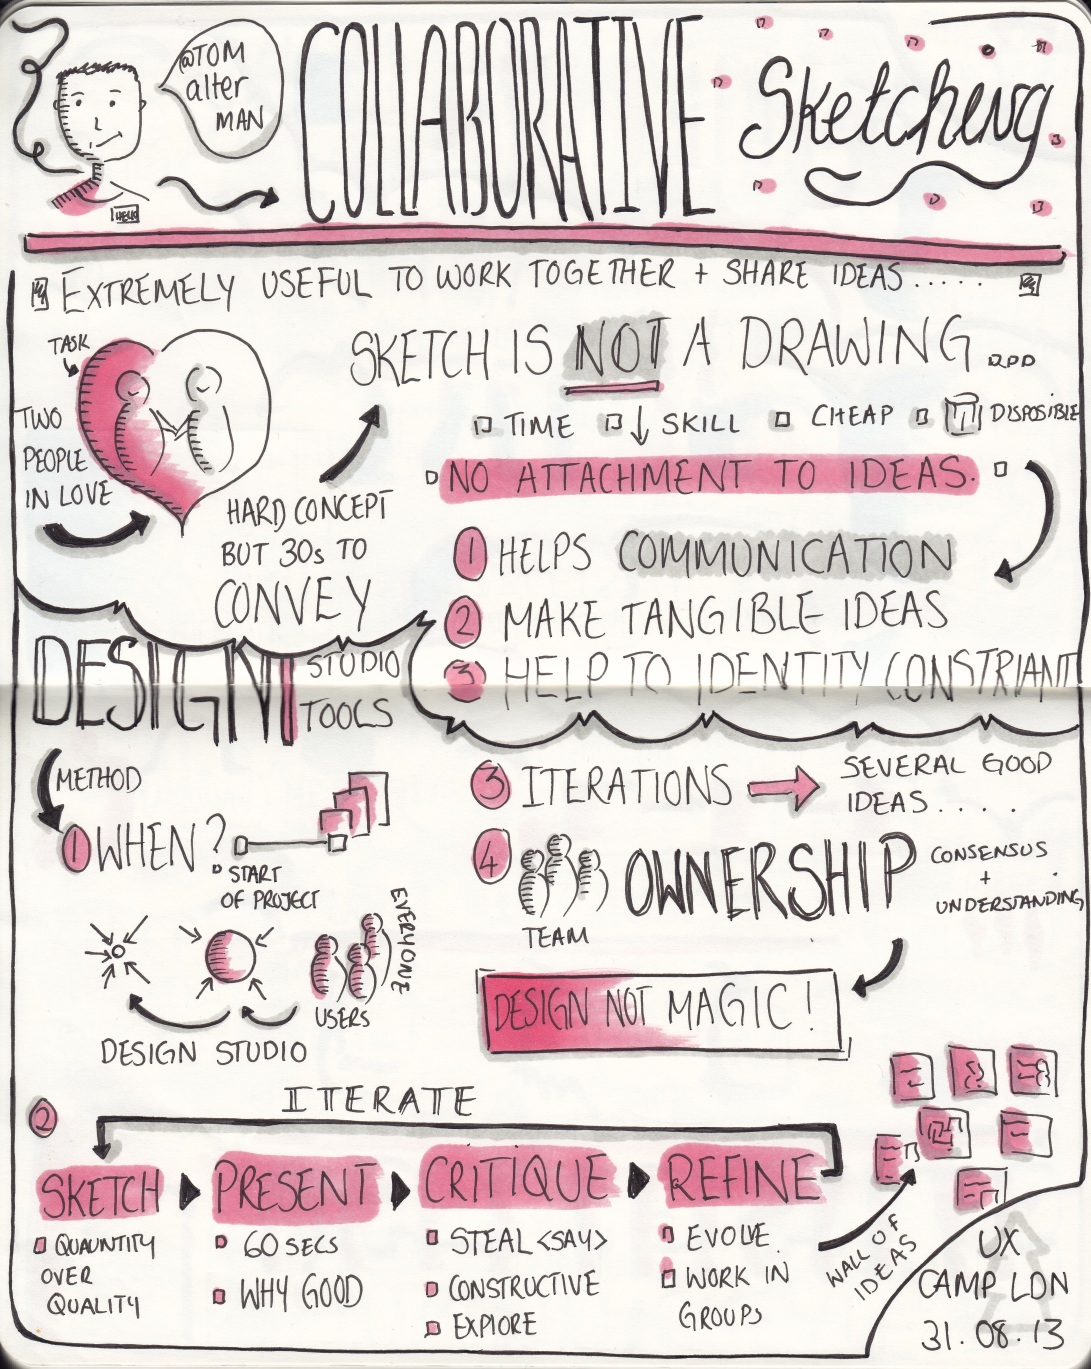 Sketchnotes from UXCL13 "Collaborative sketching" talk by @tomalterman